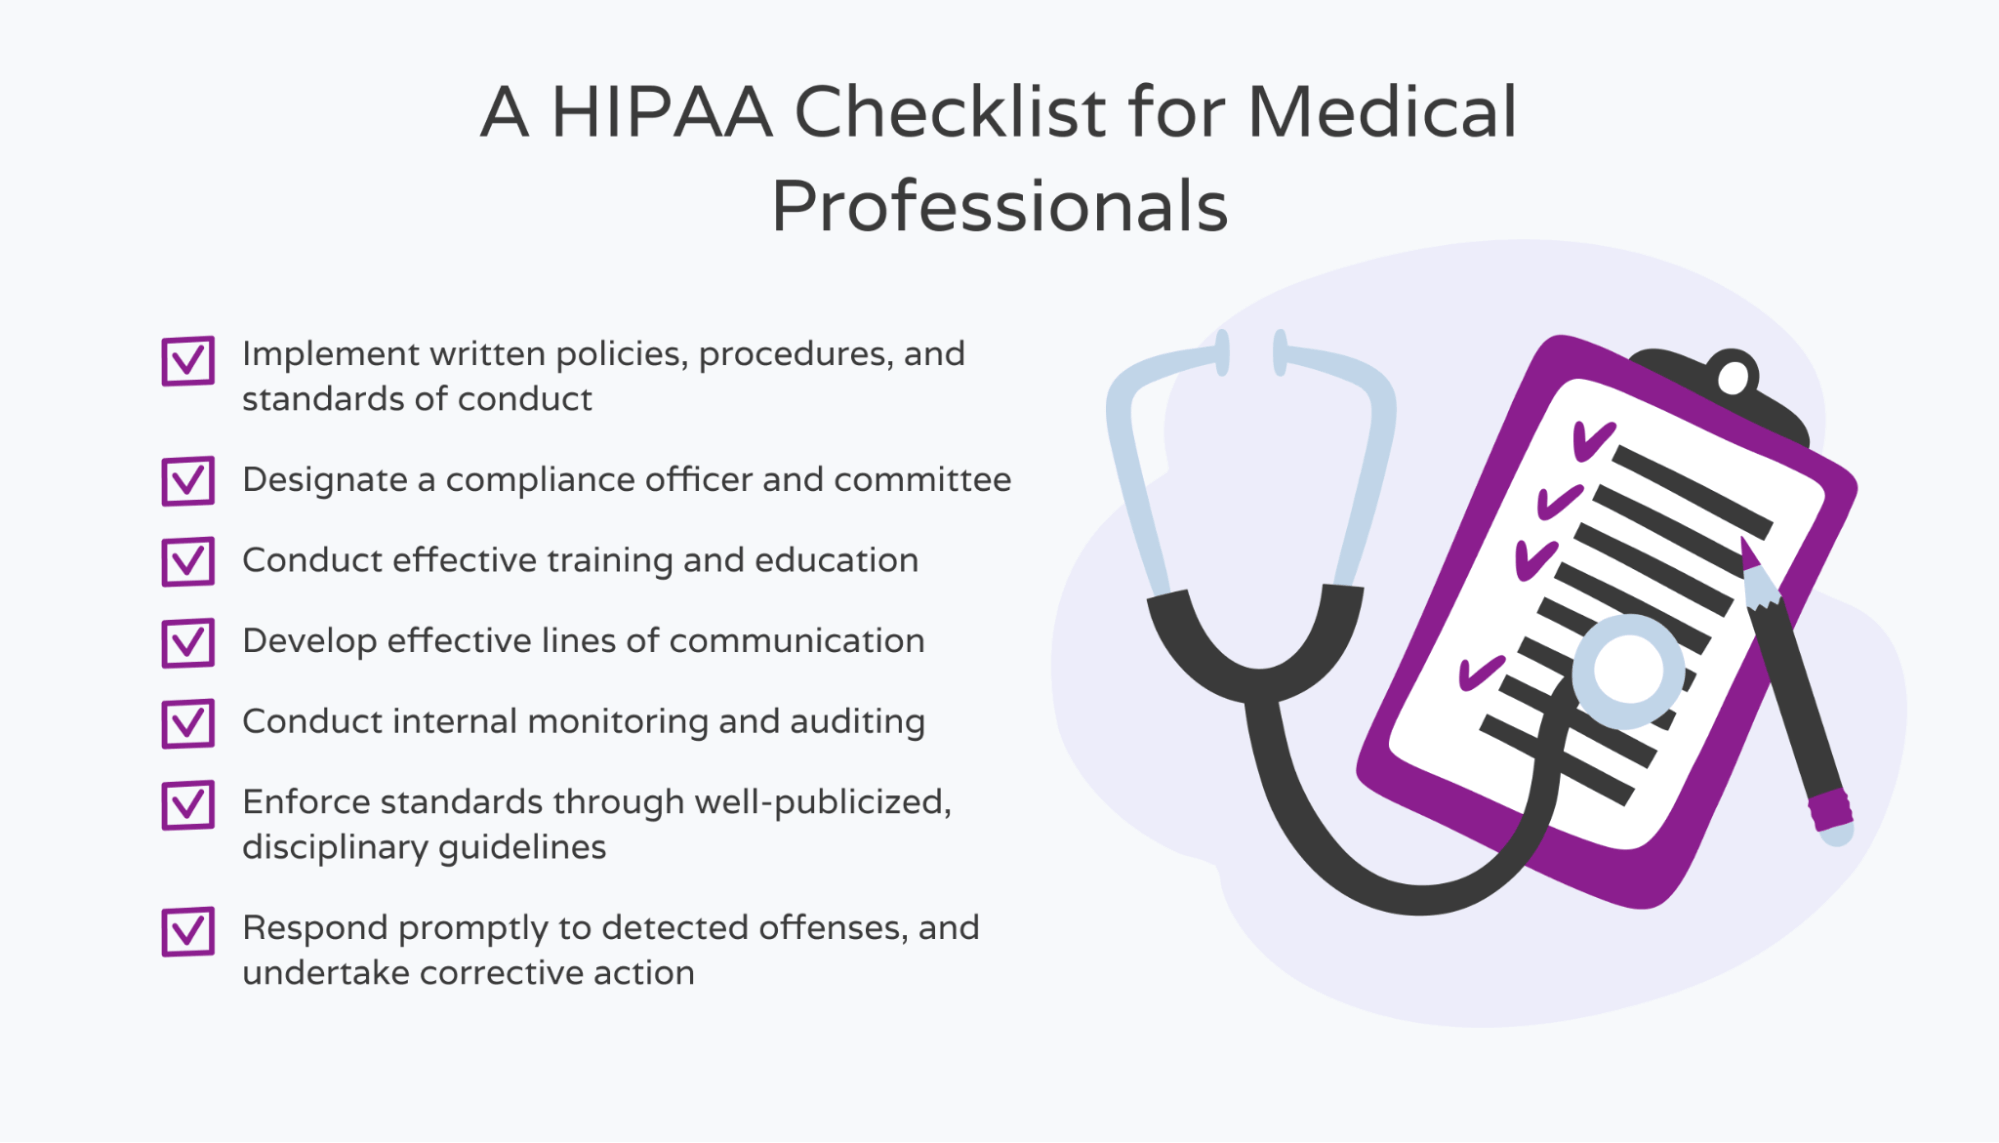 HIPPA checklist for medical practices